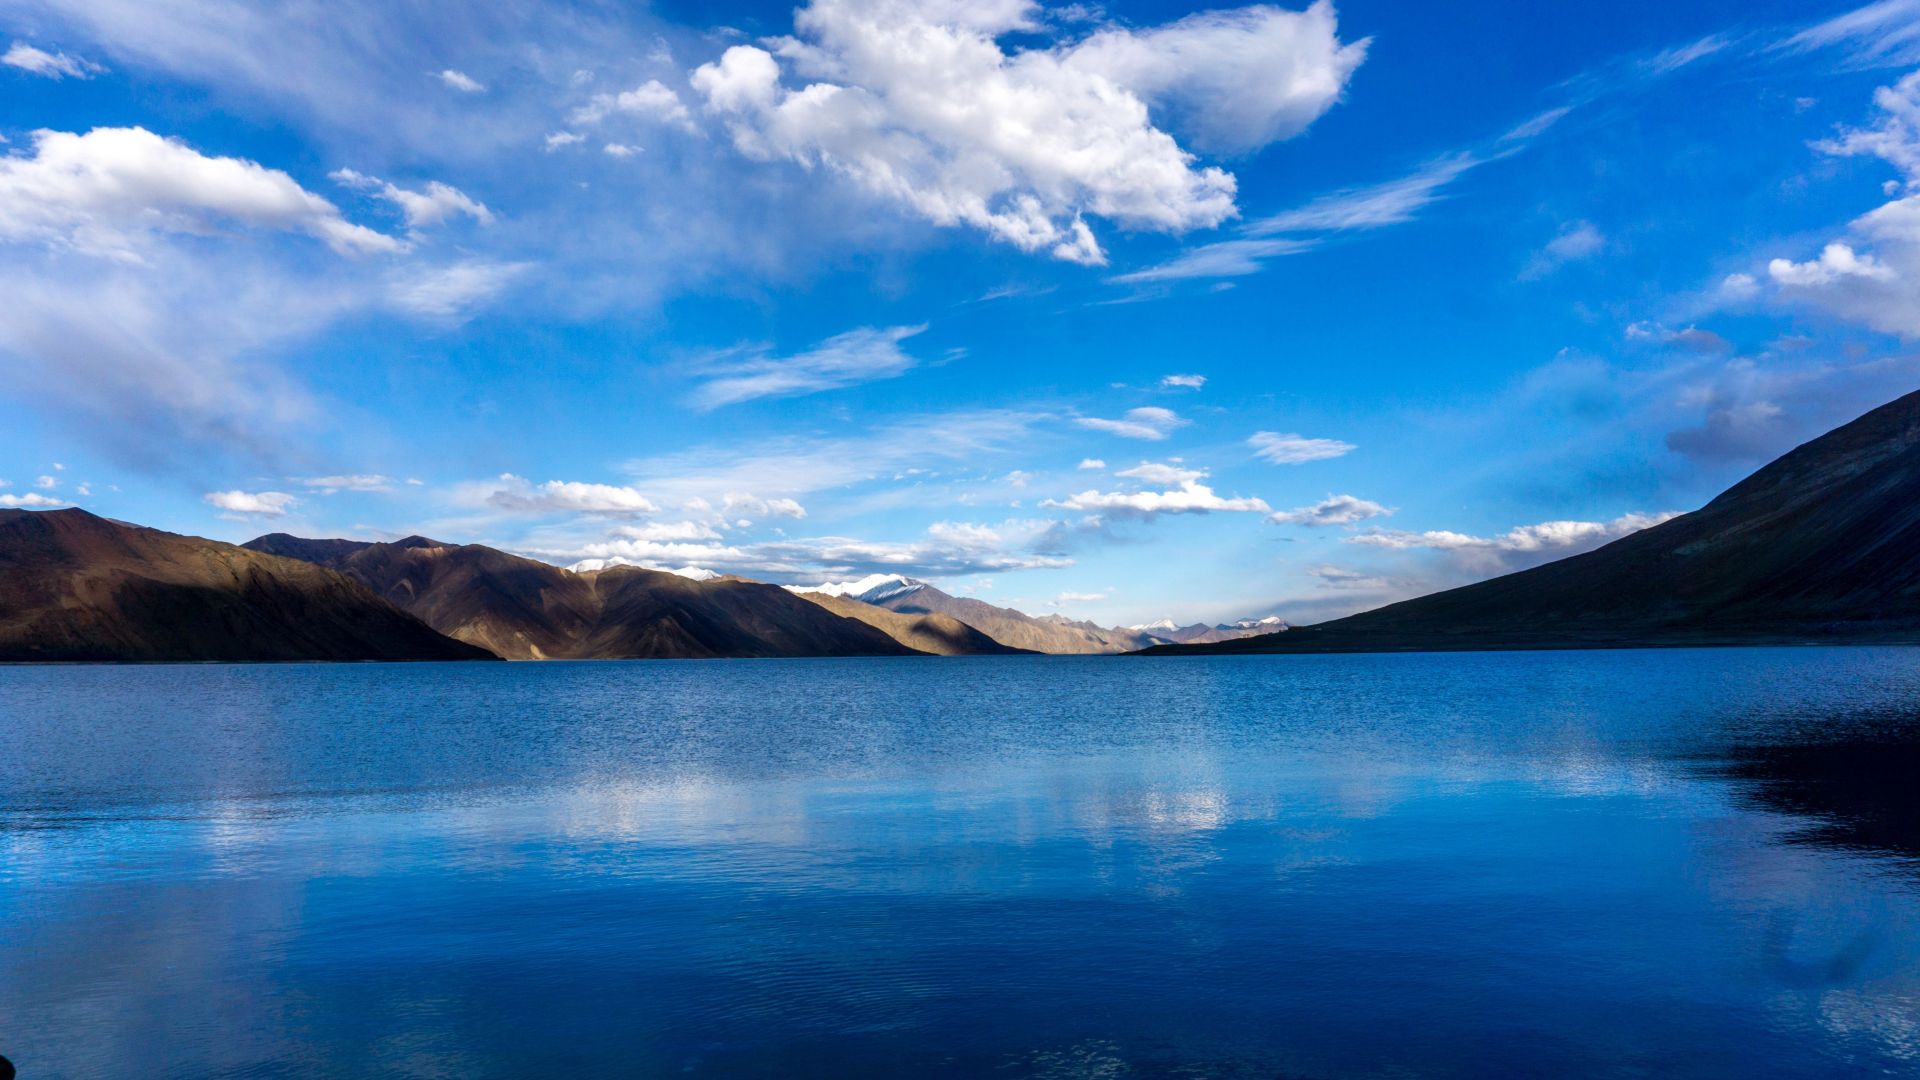 Wallpaper Lake, mountains, reflections, sunny day, nature, blue sky, clouds, 5k